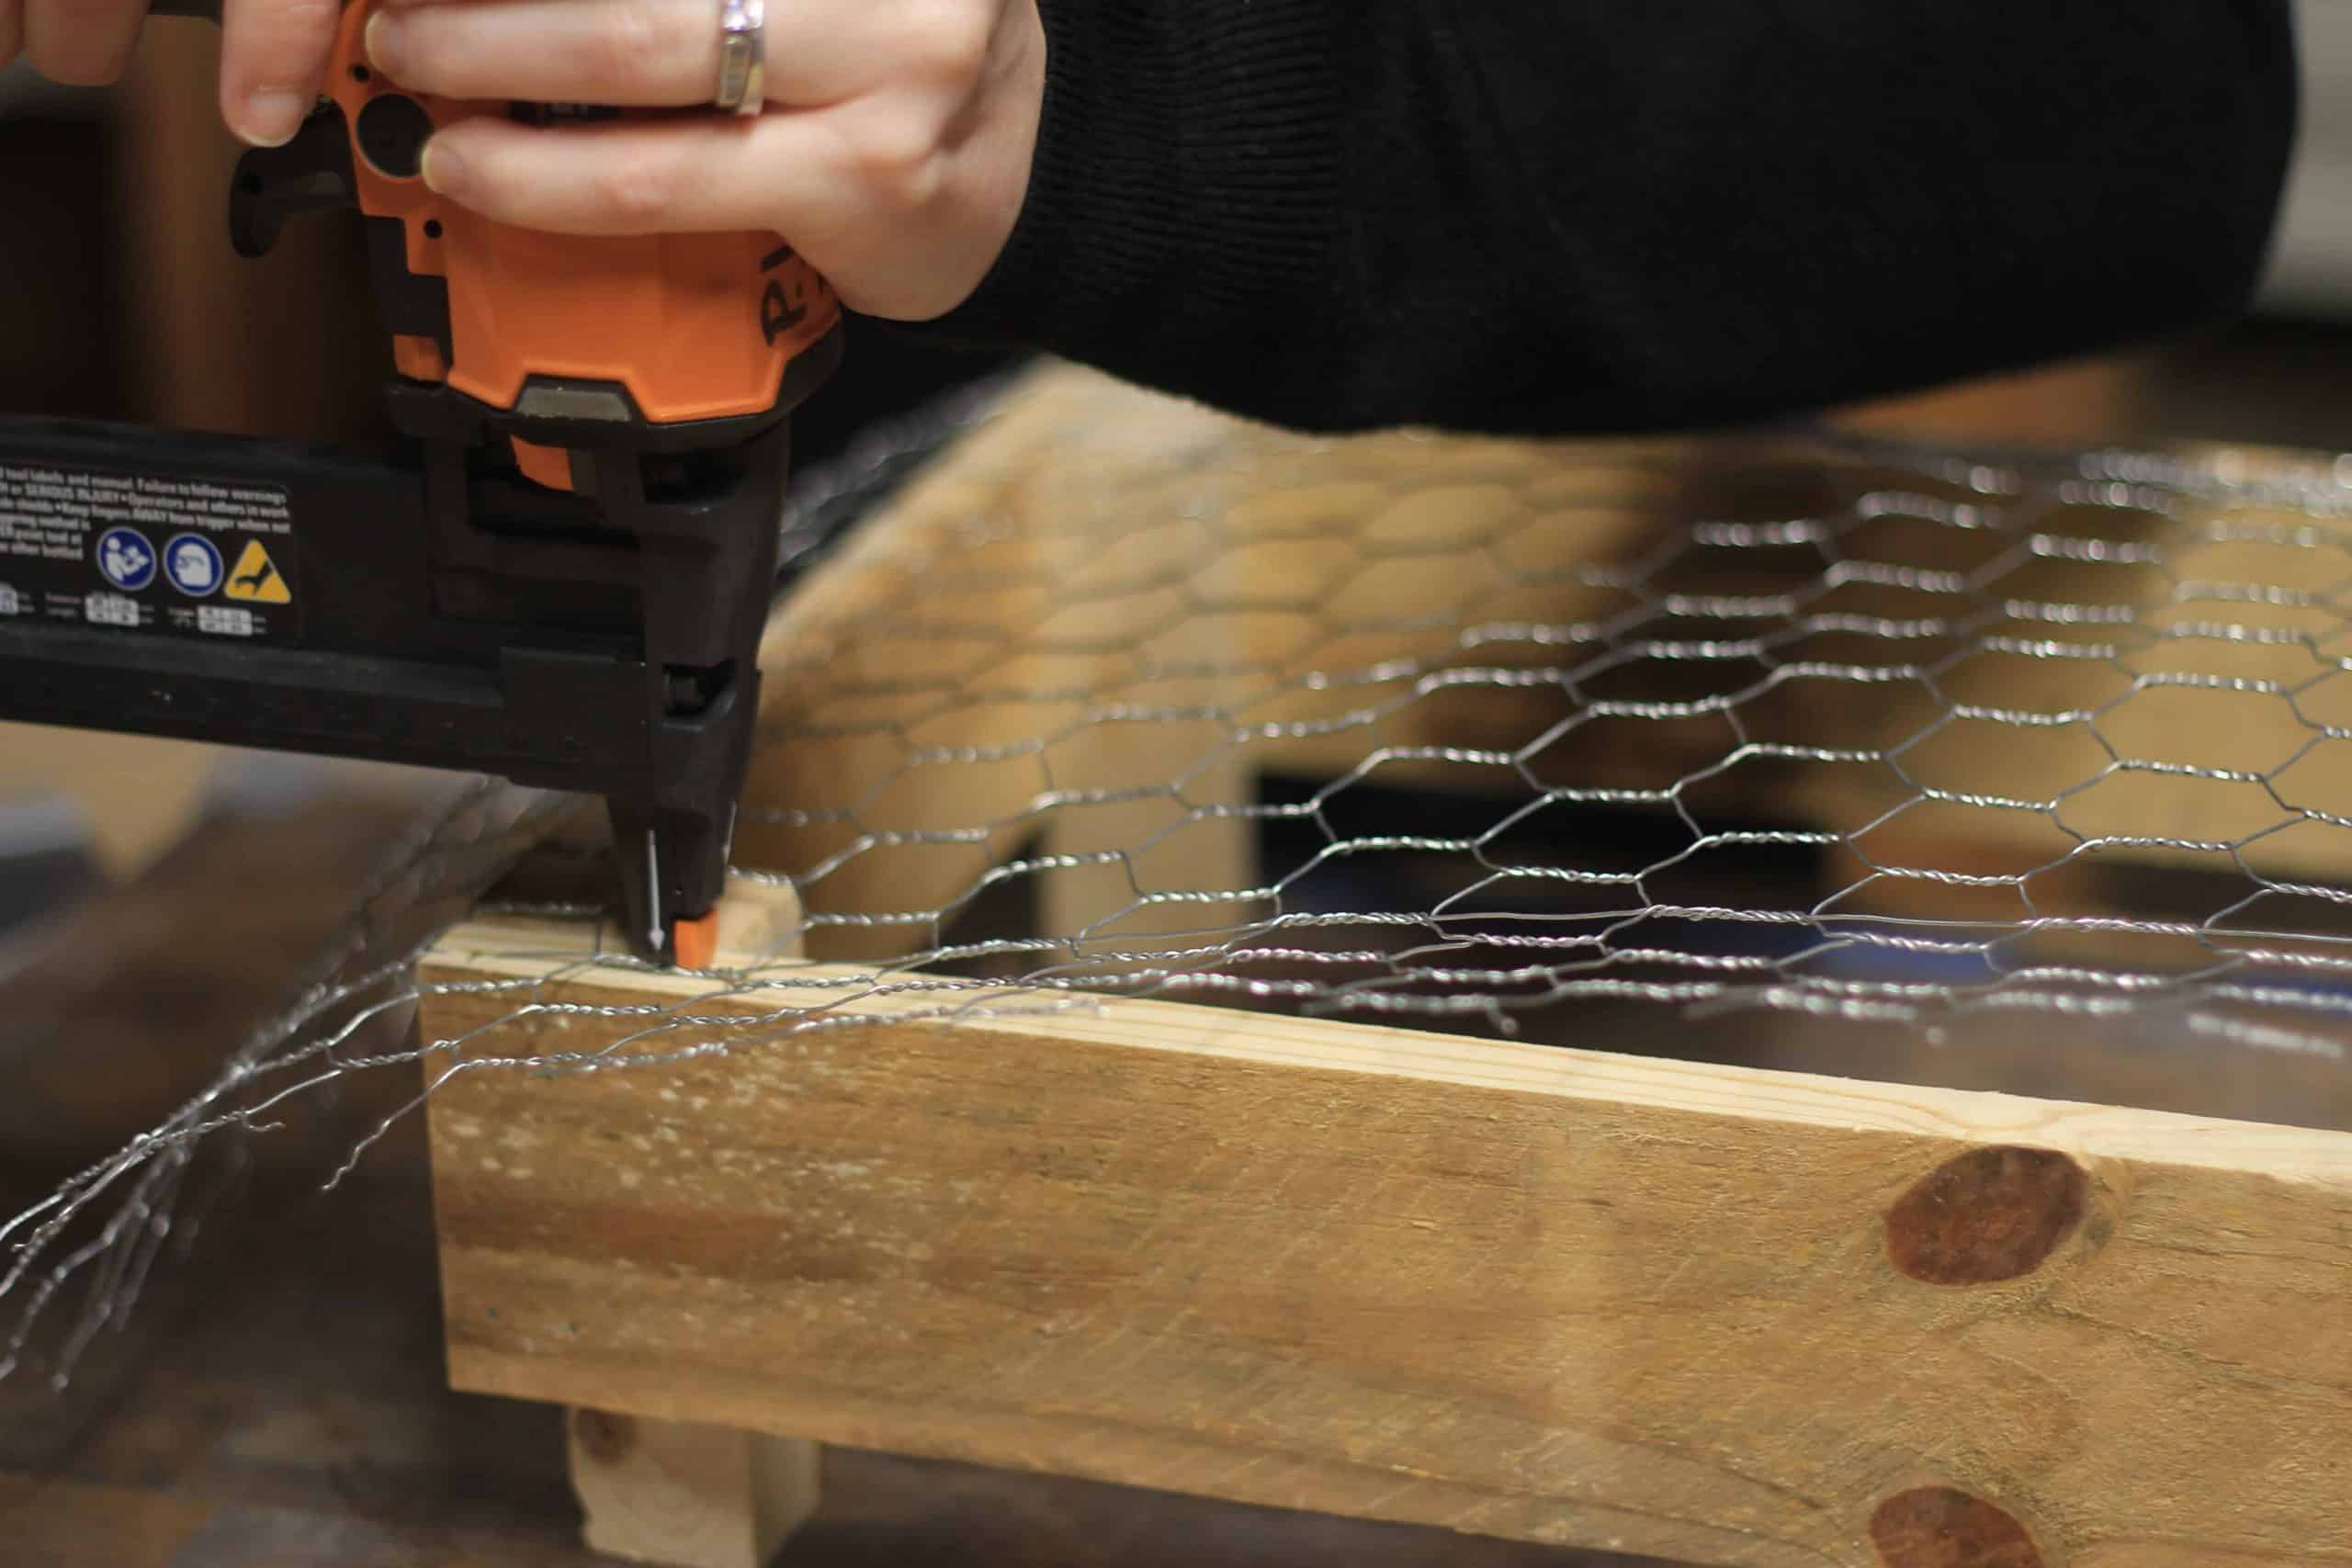 Adding chicken wire mesh to a DIY pallet crate to have a bottom to hold decorations and other kitchen utensils